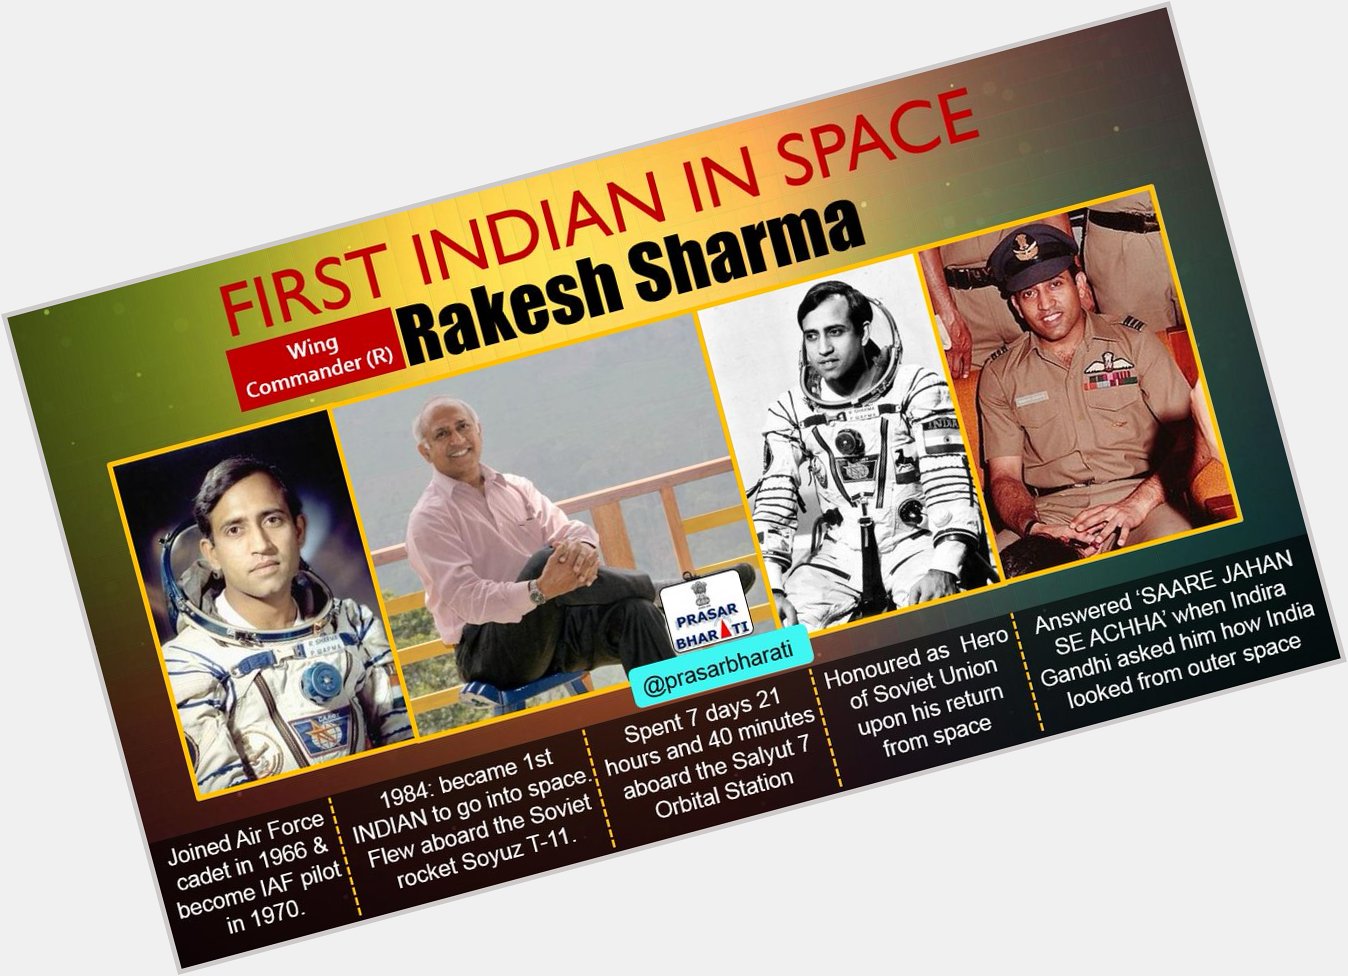 Happy Birthday Rakesh Sharma !!
The First Indian to travel in Space 